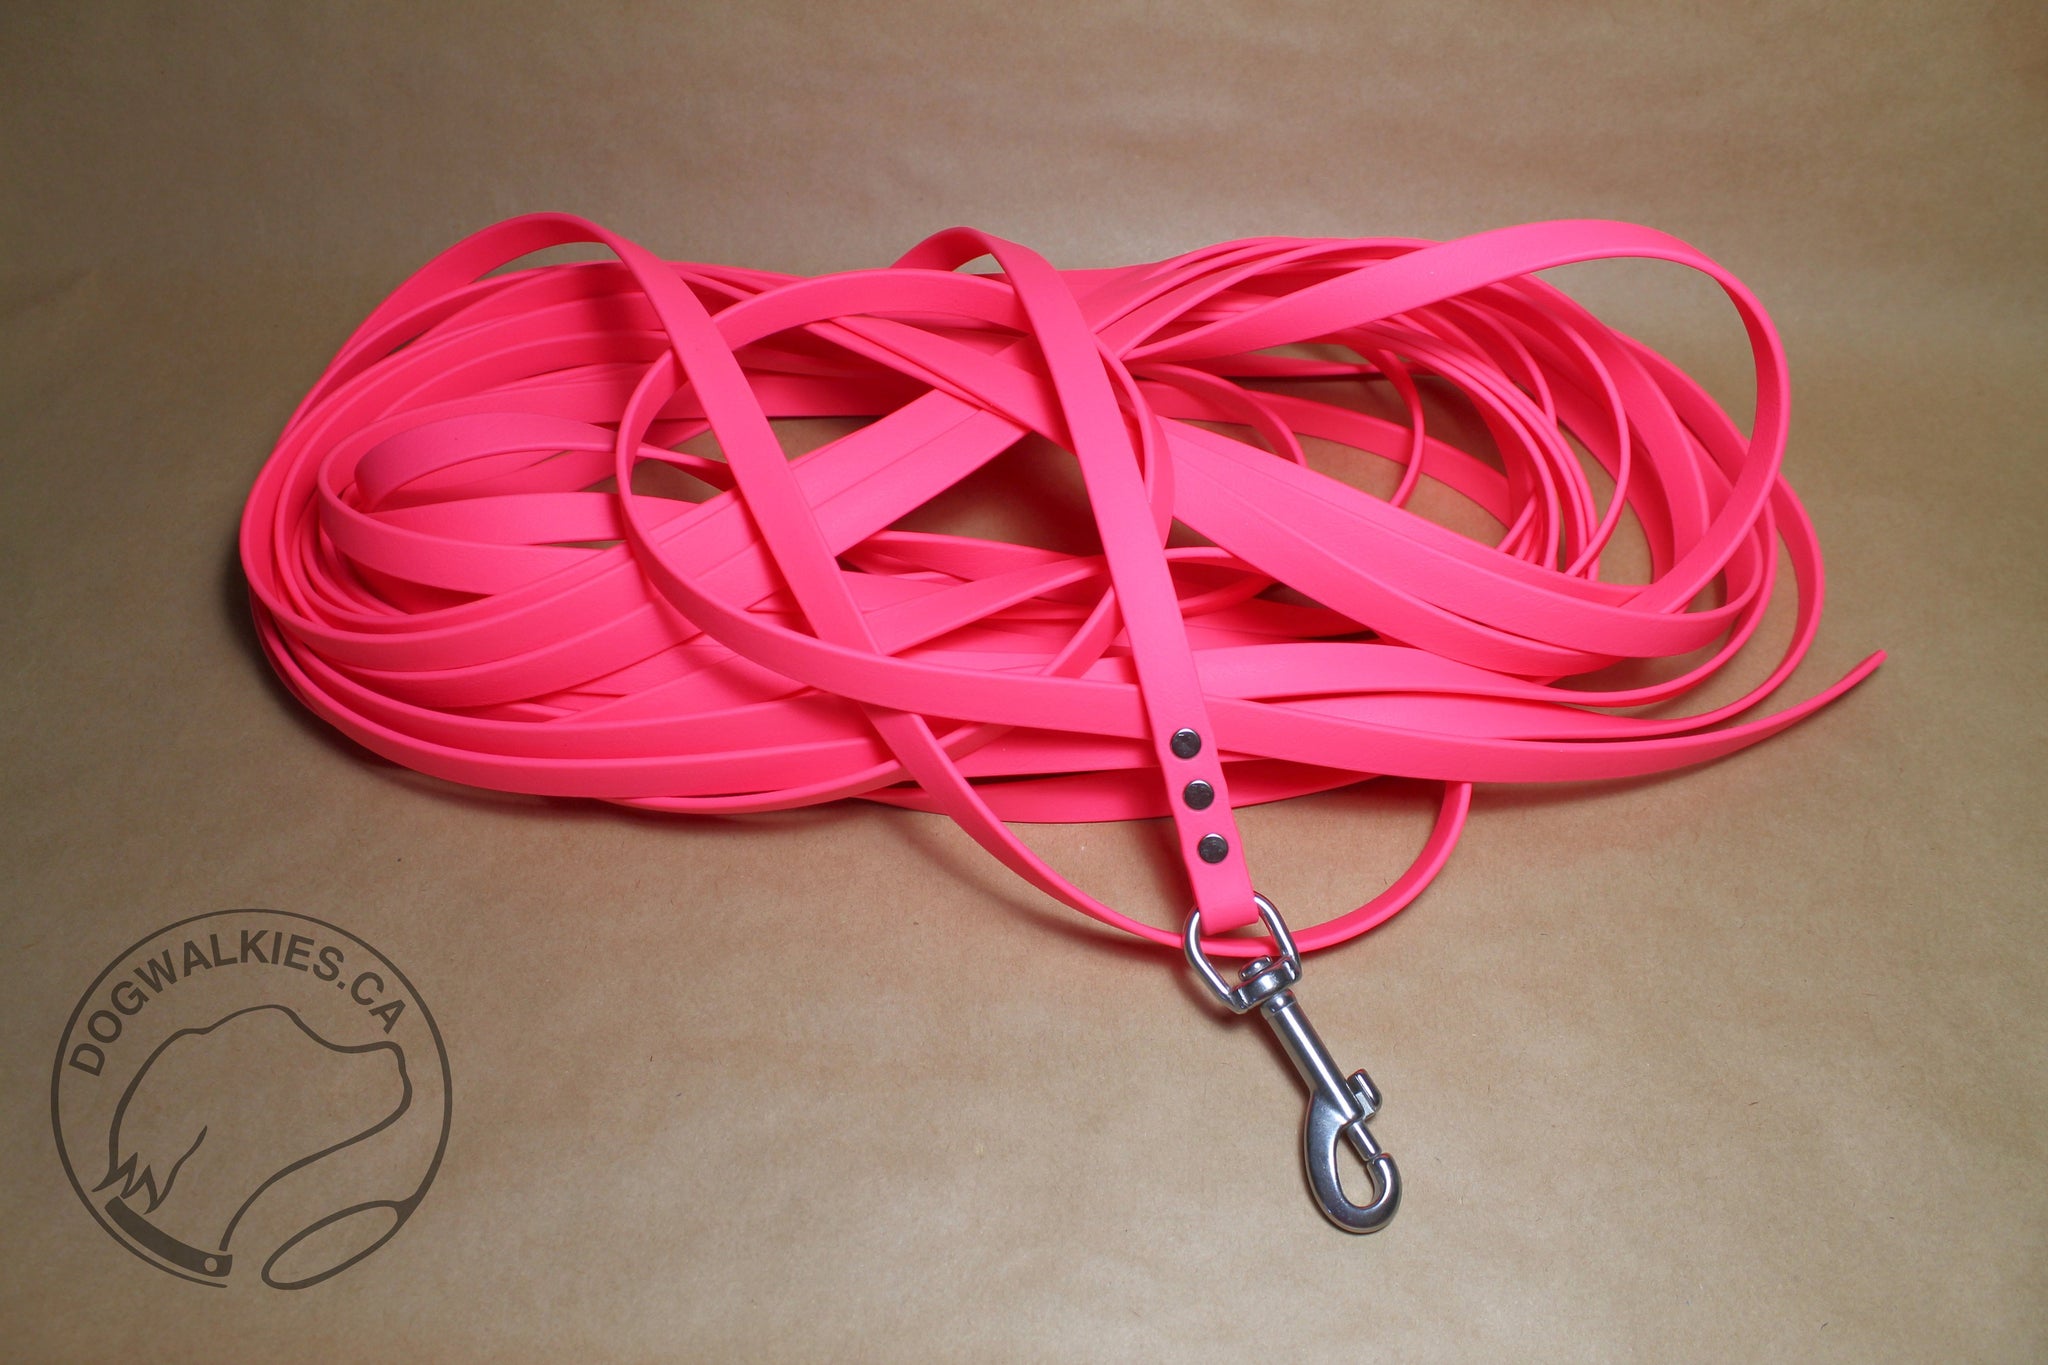 Extra long leash 1/2" (12mm) wide - 15m (50ft) or 30m (100ft) Biothane Waterproof Tracking Recall Long Line - All Colours